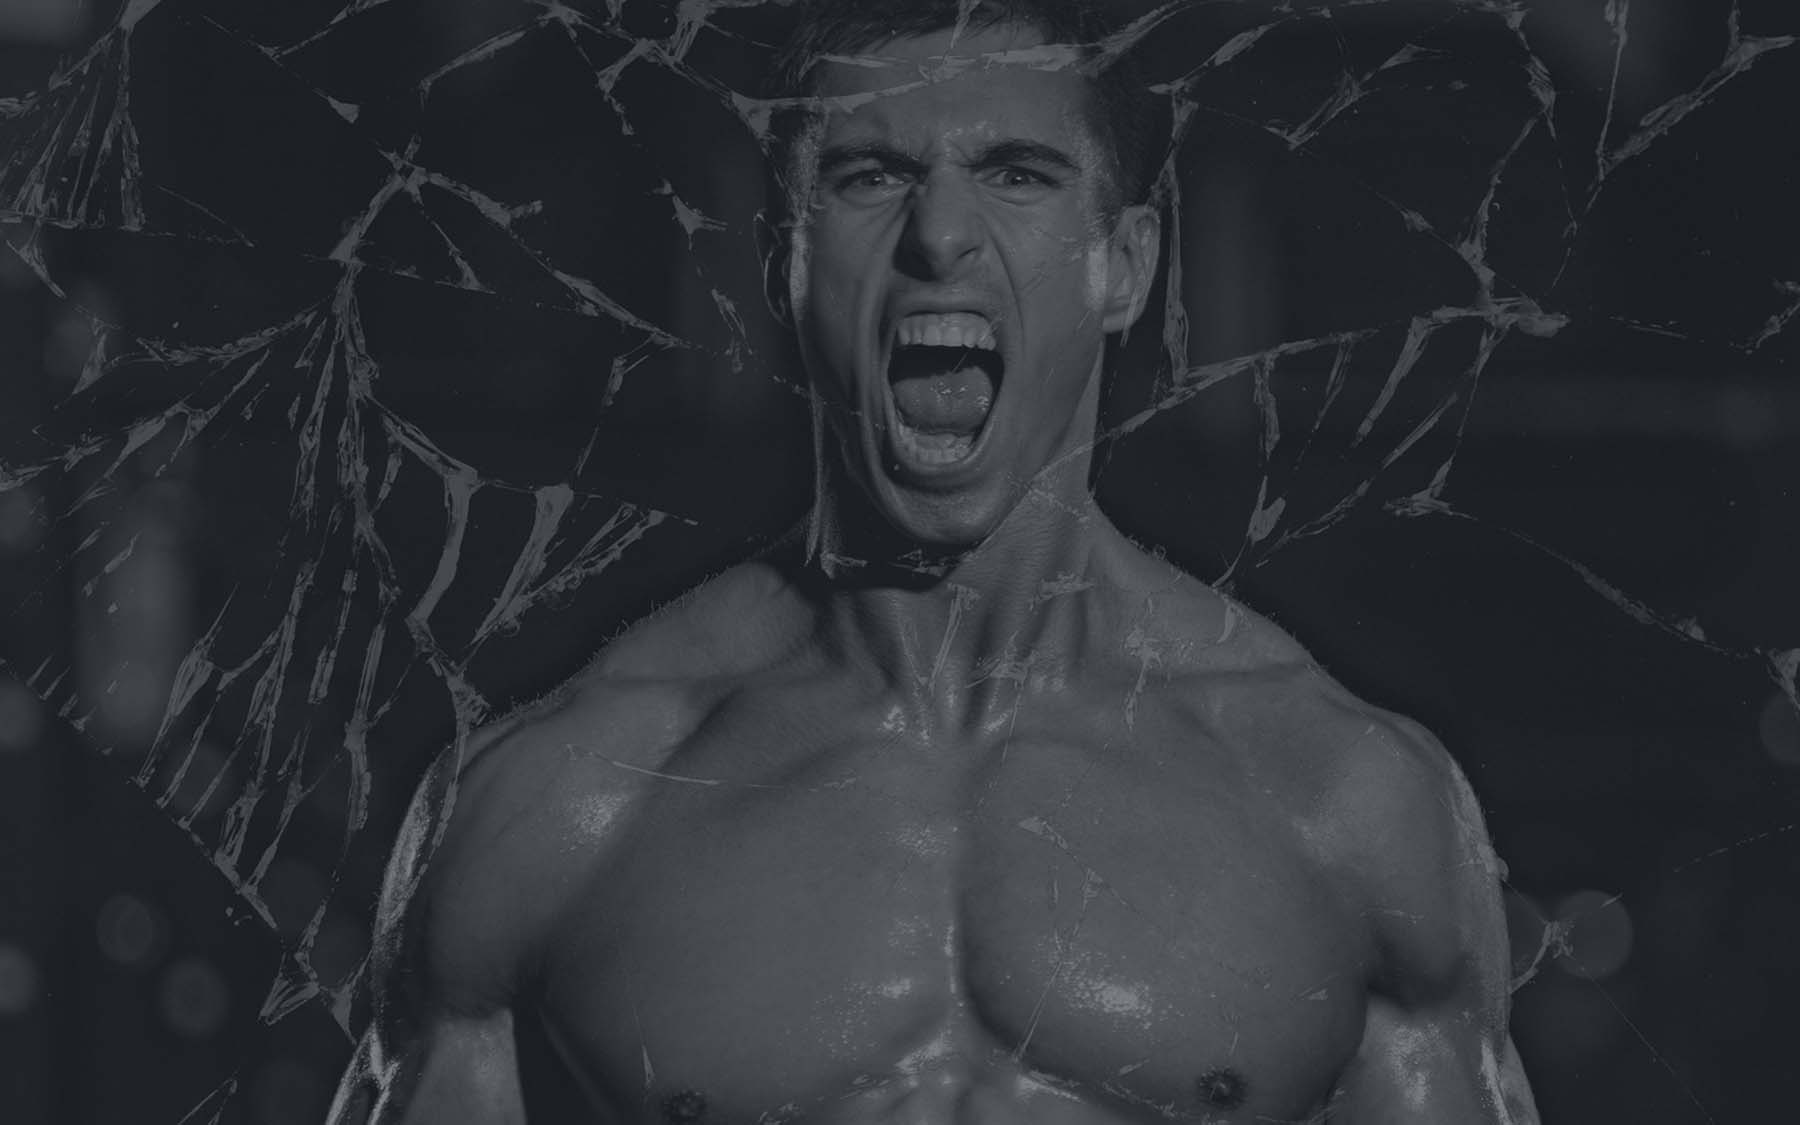 A bodybuilder customer from Ocala Nutrition screaming in a black background.